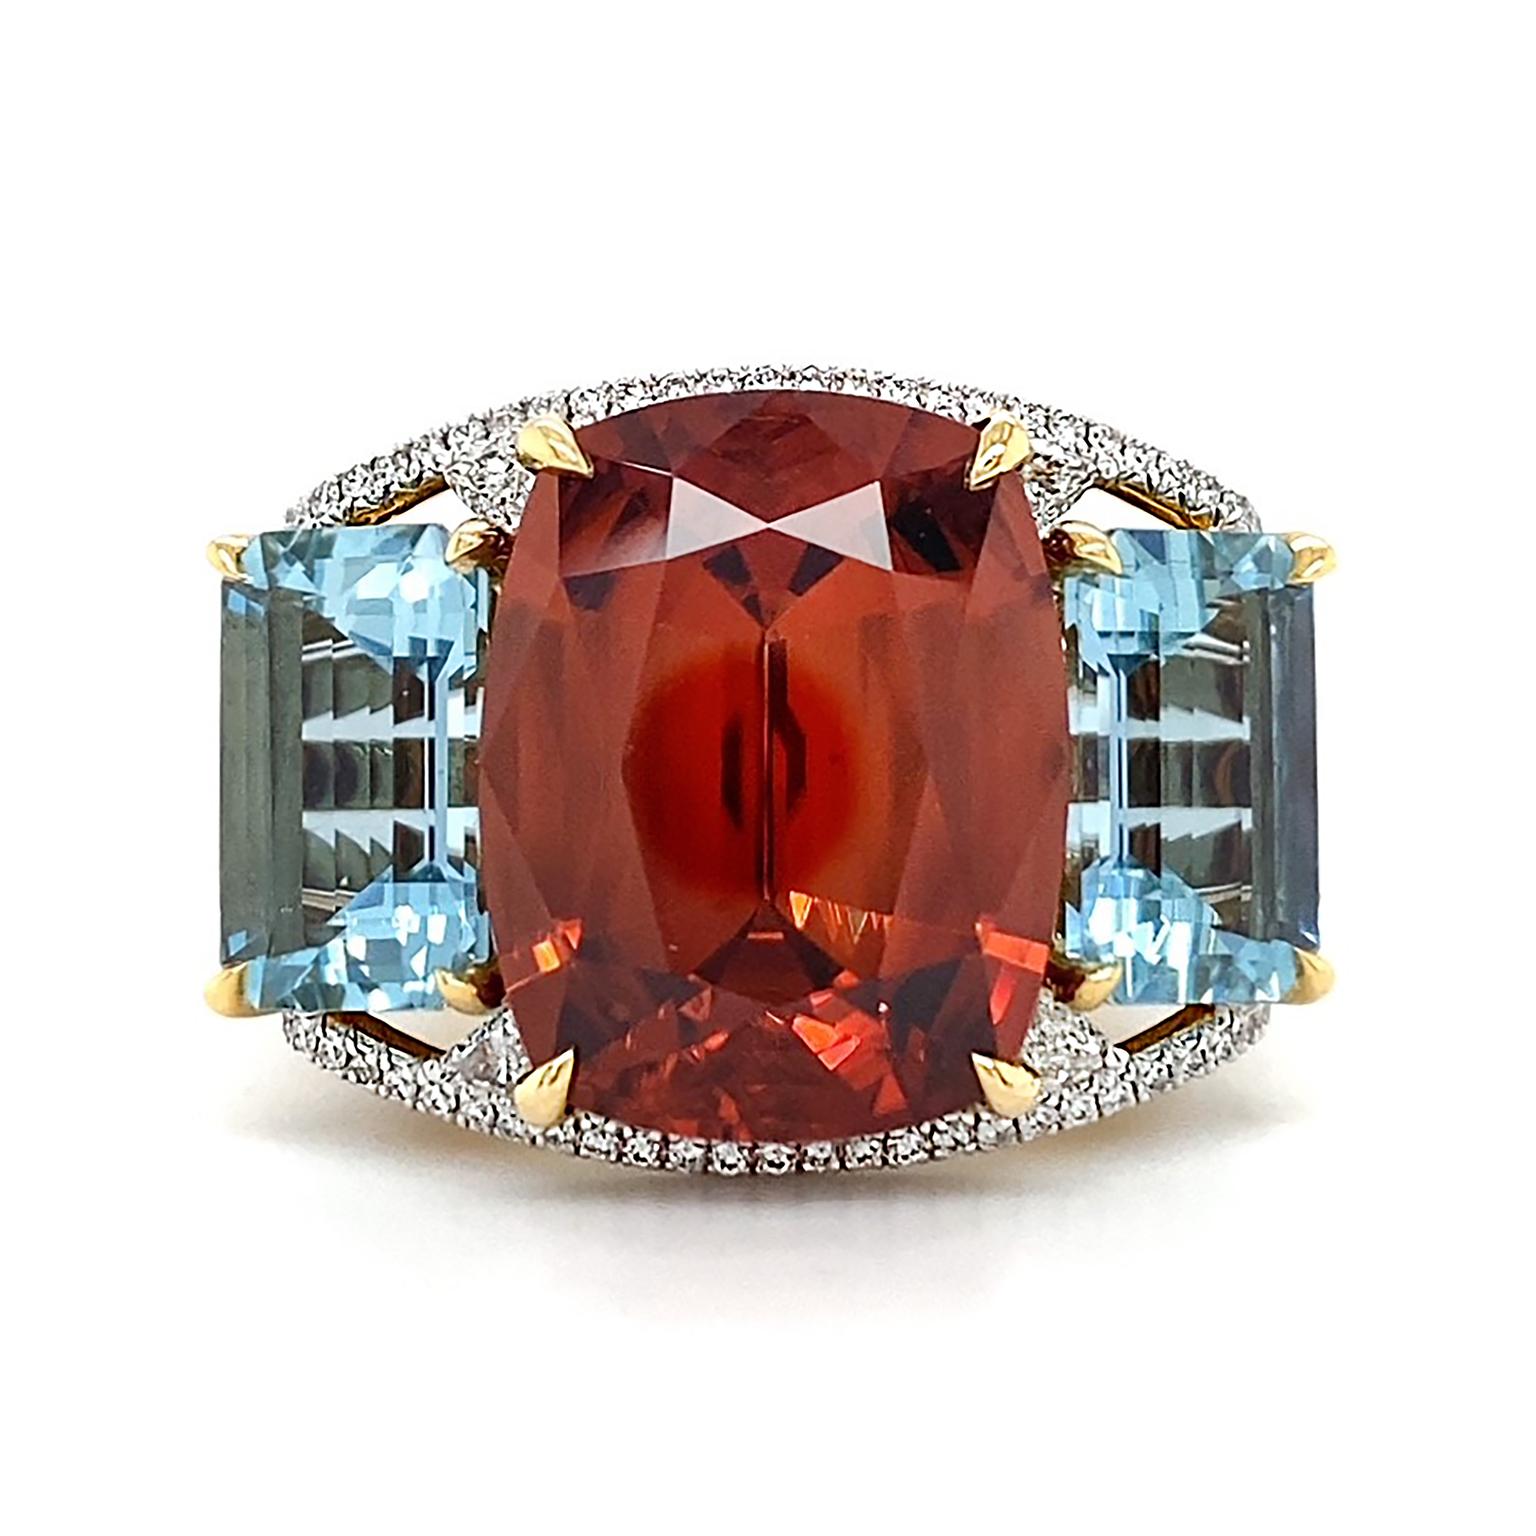 An arresting duo of jewels glow each other. The blazing orange hue of zircon in a cushion cut serves as the culmination of this ring held by 18k yellow gold prongs in the center. More light dances off an emerald cut of aquamarine on each side of the